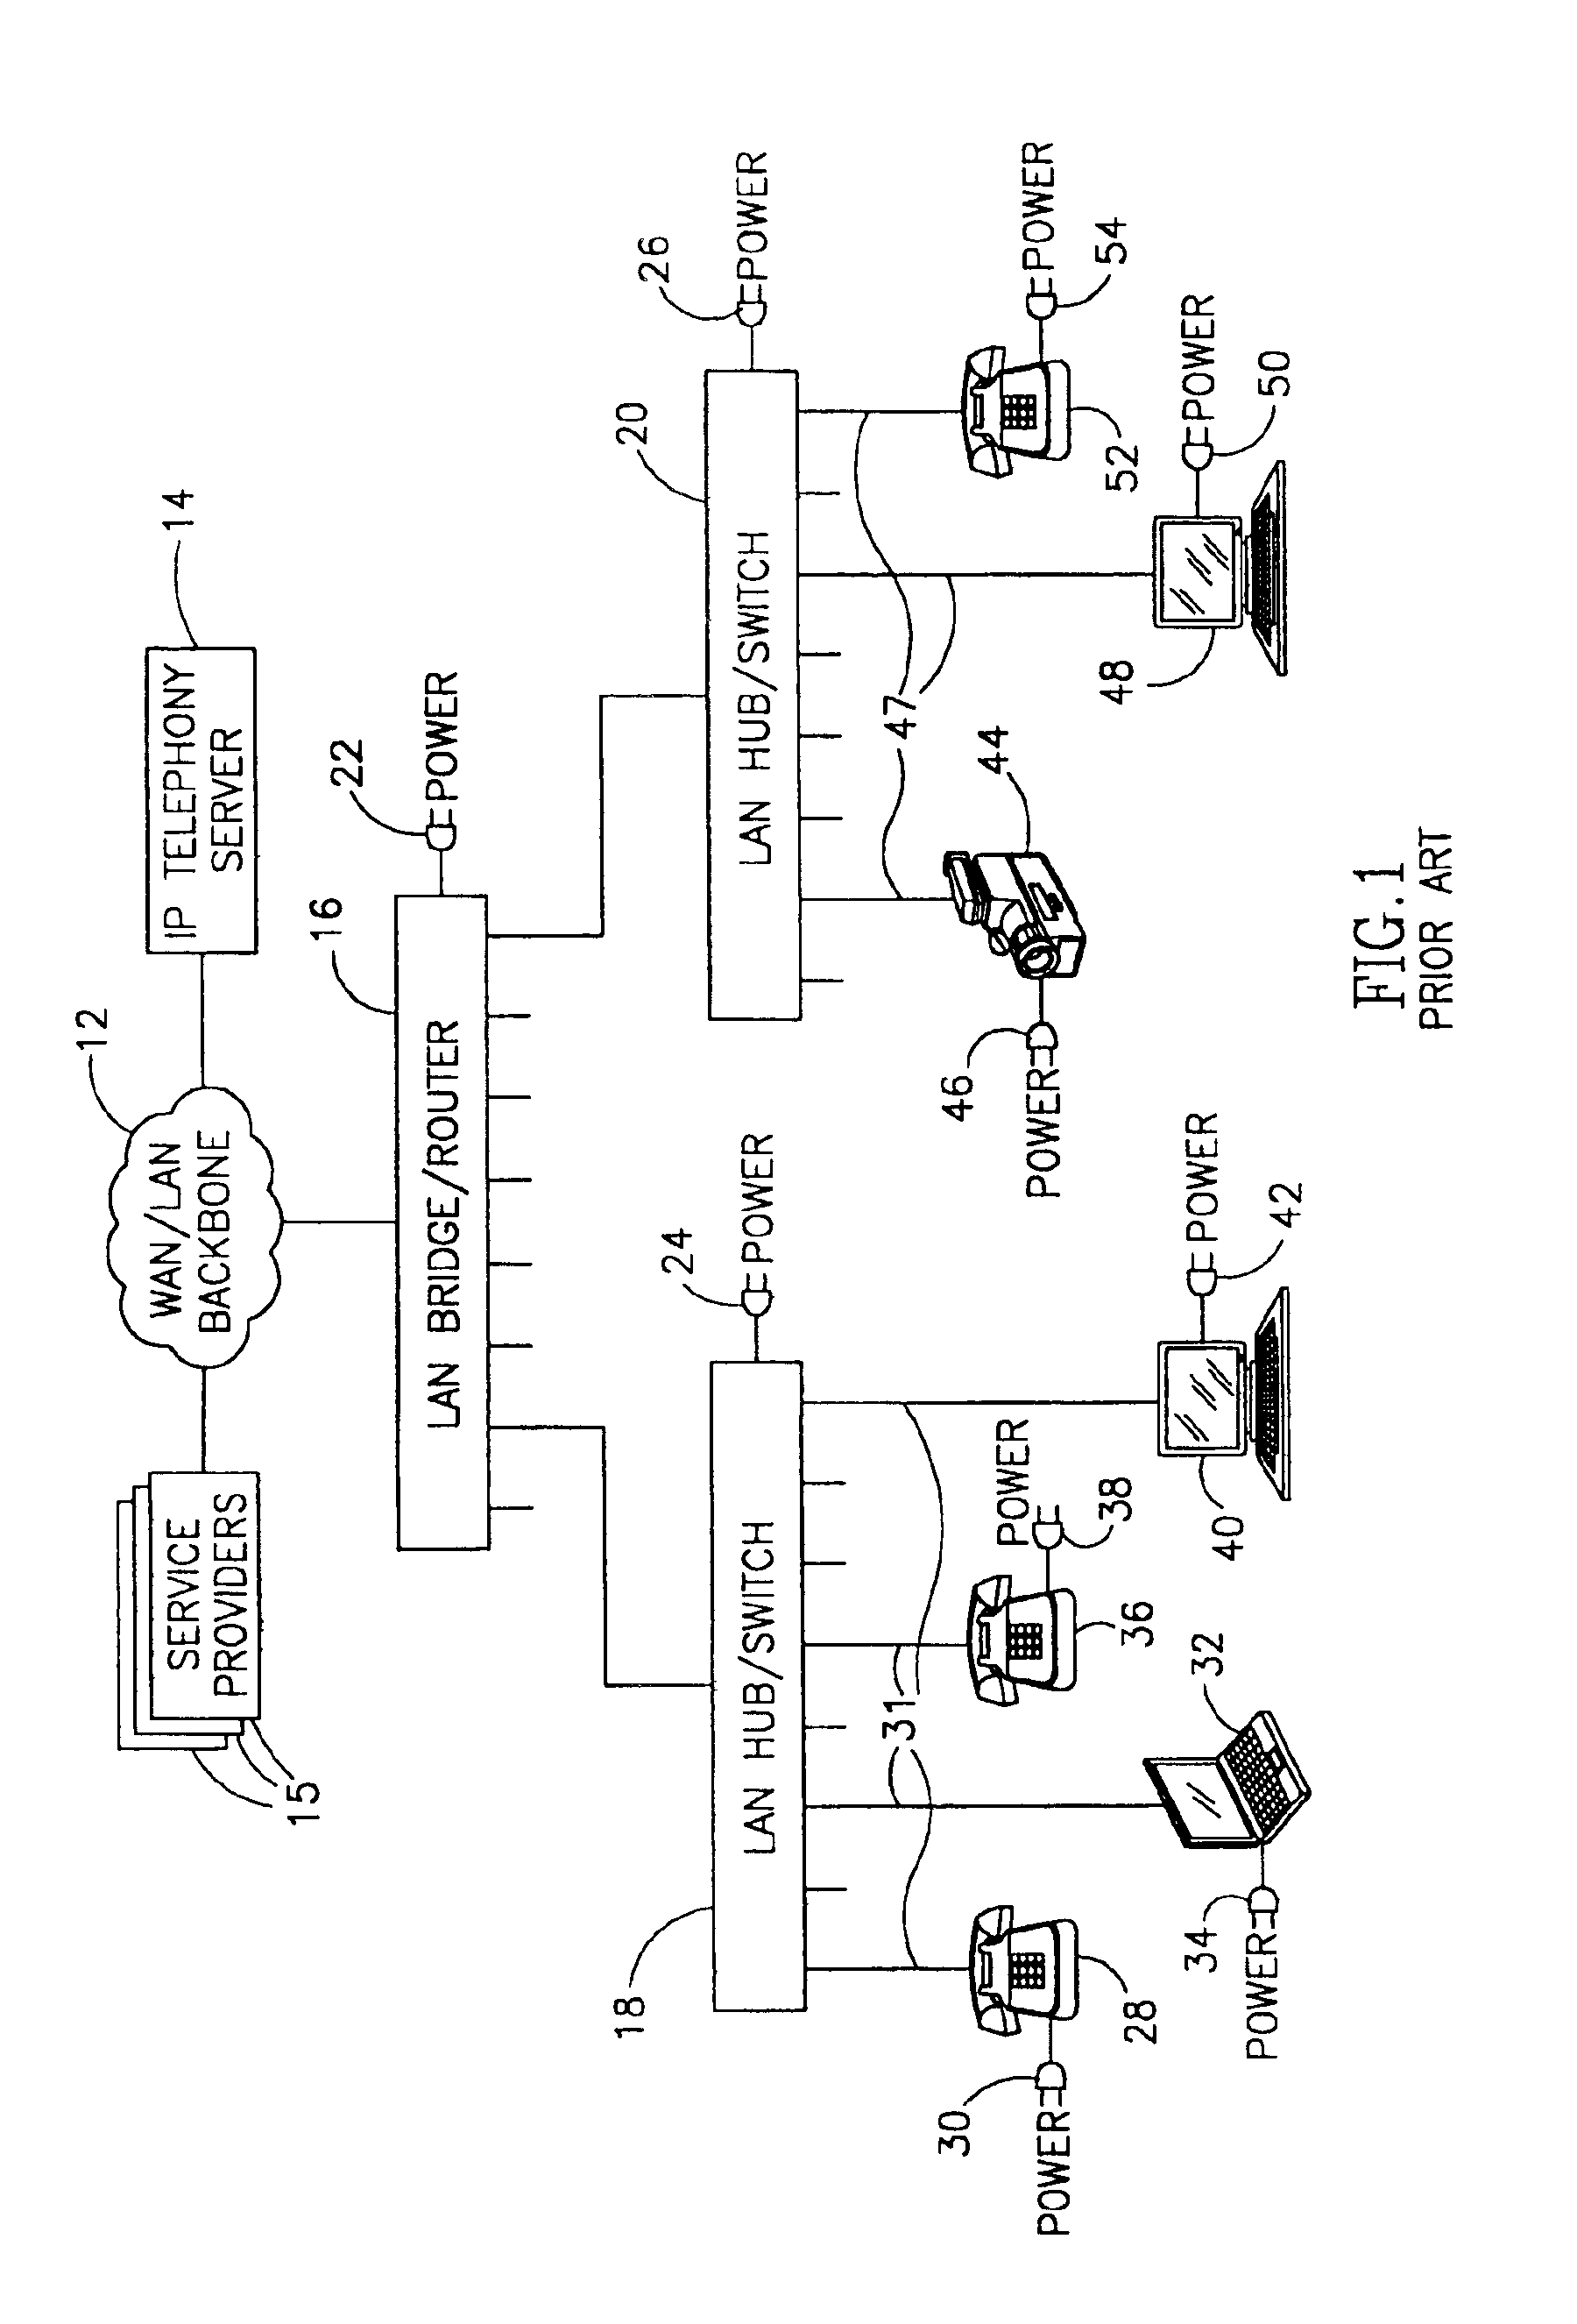 System for power delivery over data communication cabling infrastructure